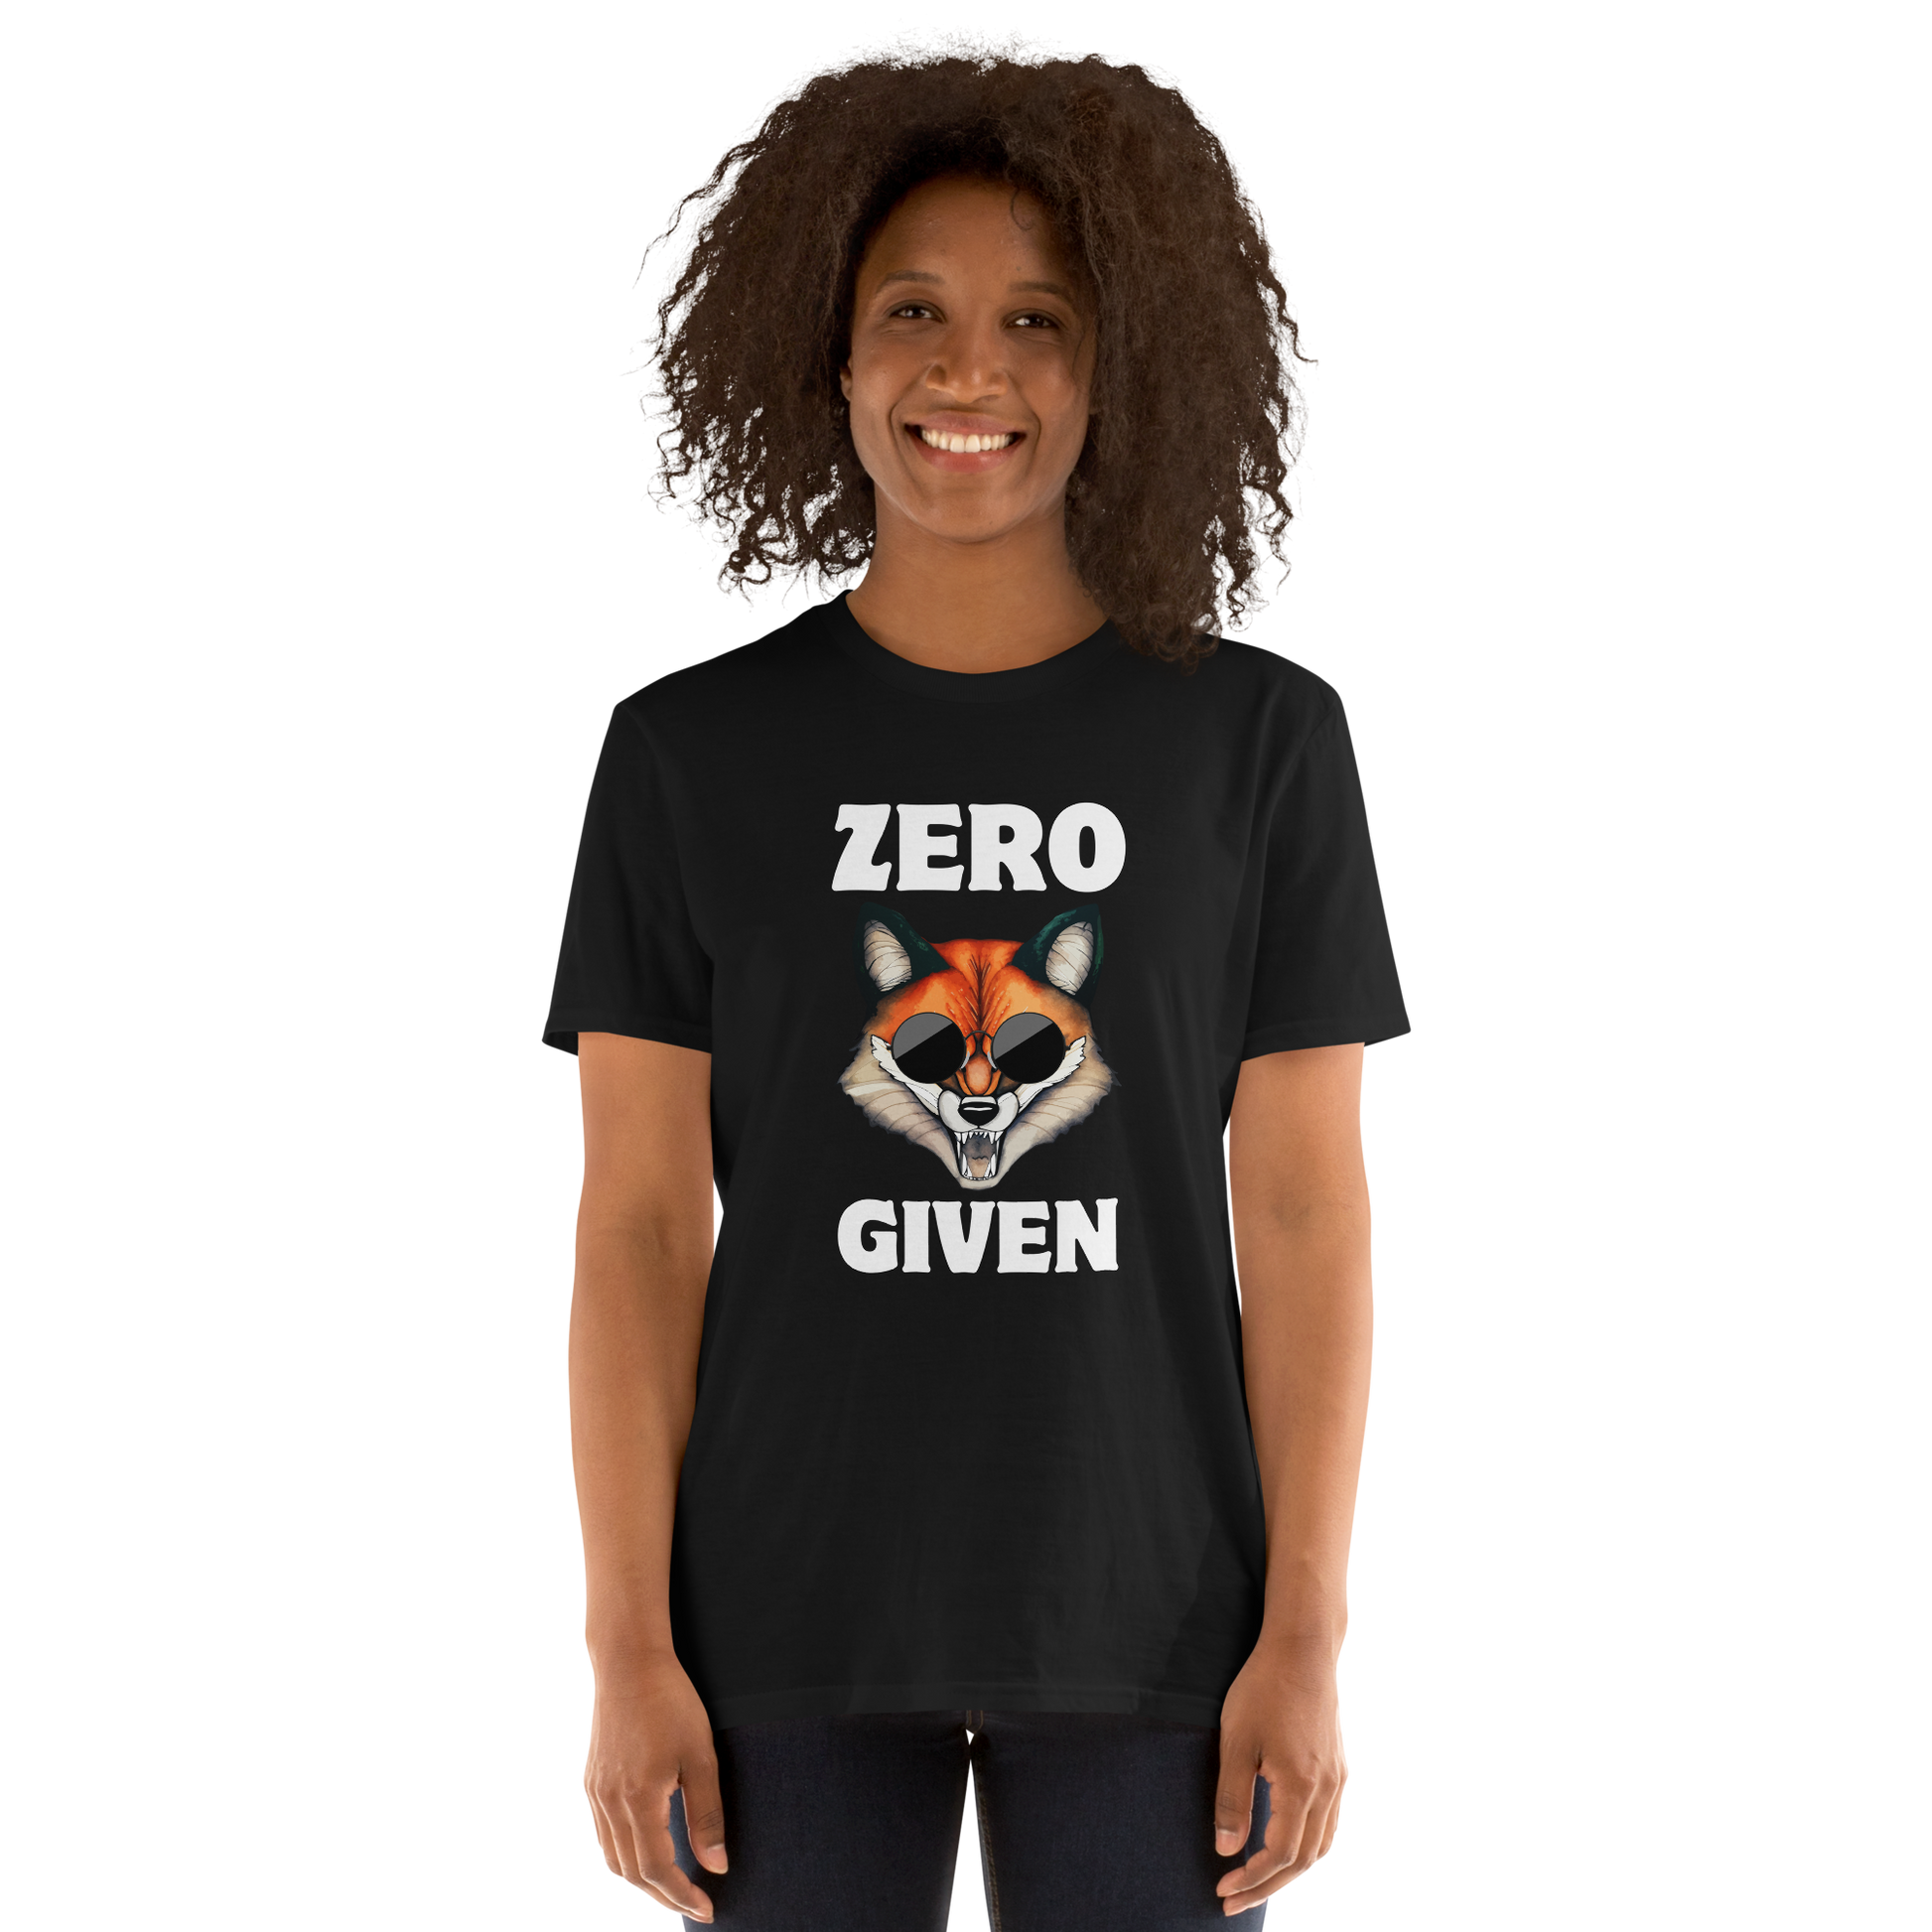 Woman wearing a Black Fox T-Shirt featuring a Zero Fox Given graphic on the chest - Funny Graphic Fox T-Shirts - Boozy Fox